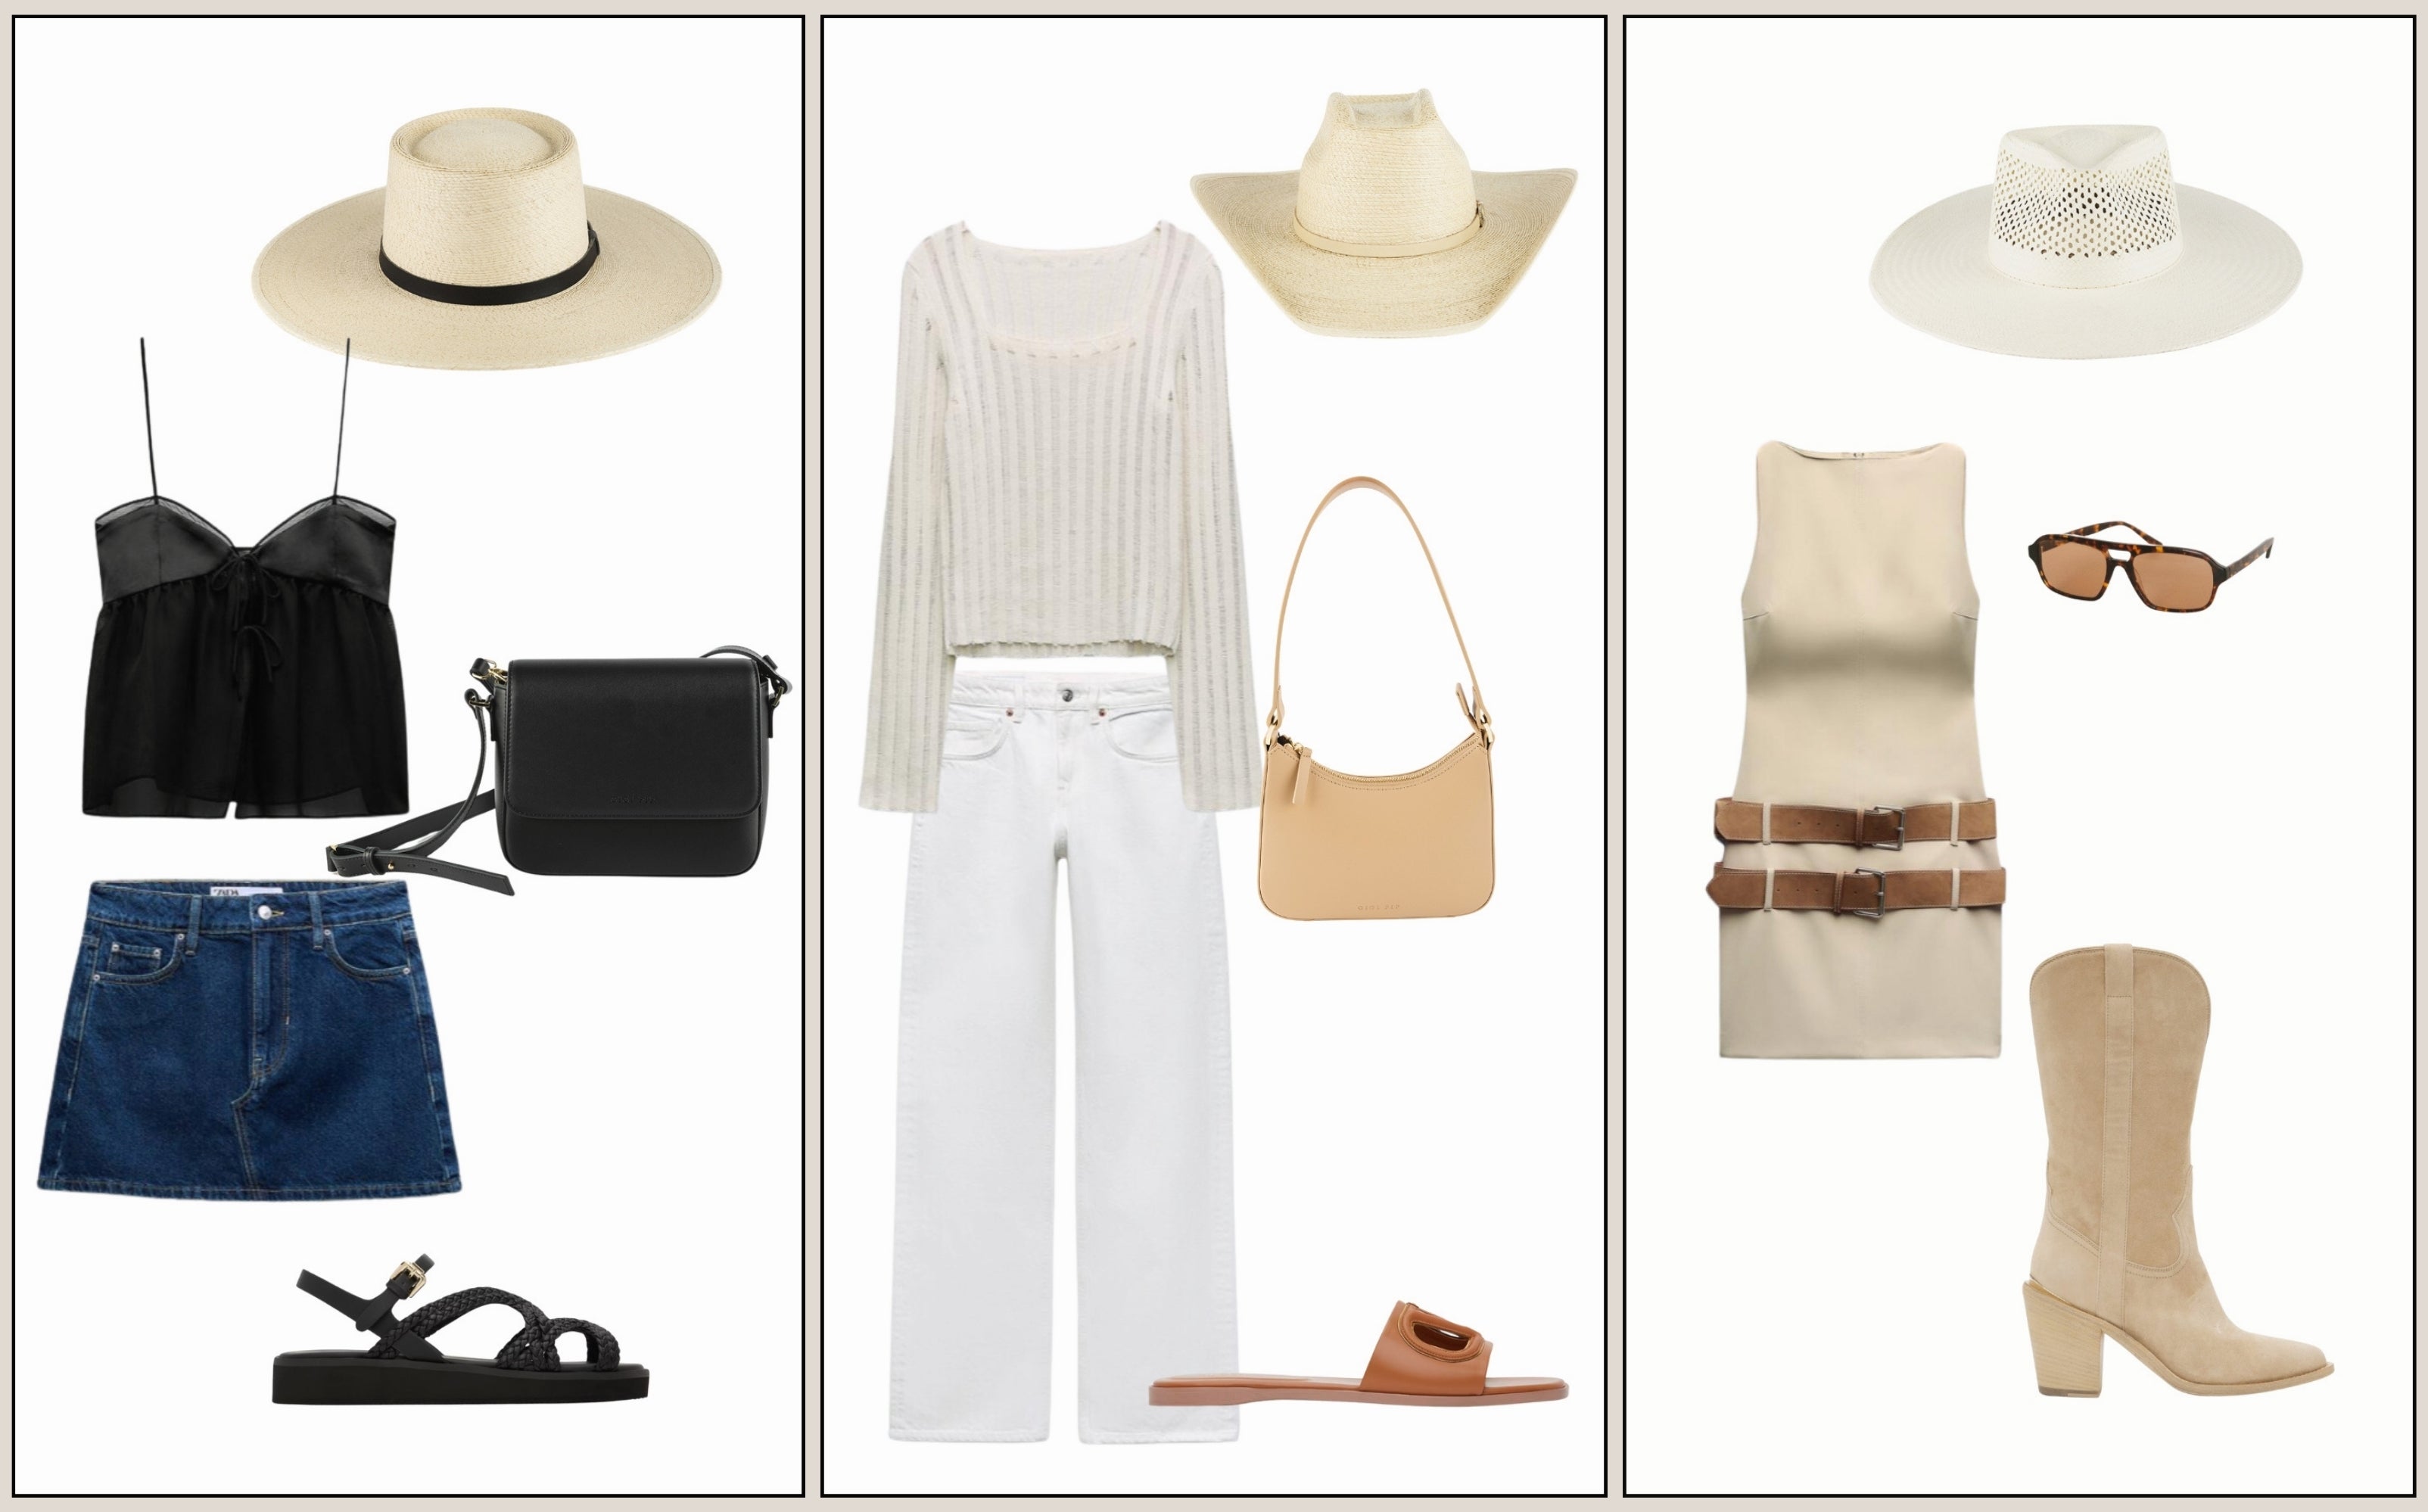 3 Coachella music festival outfit examples